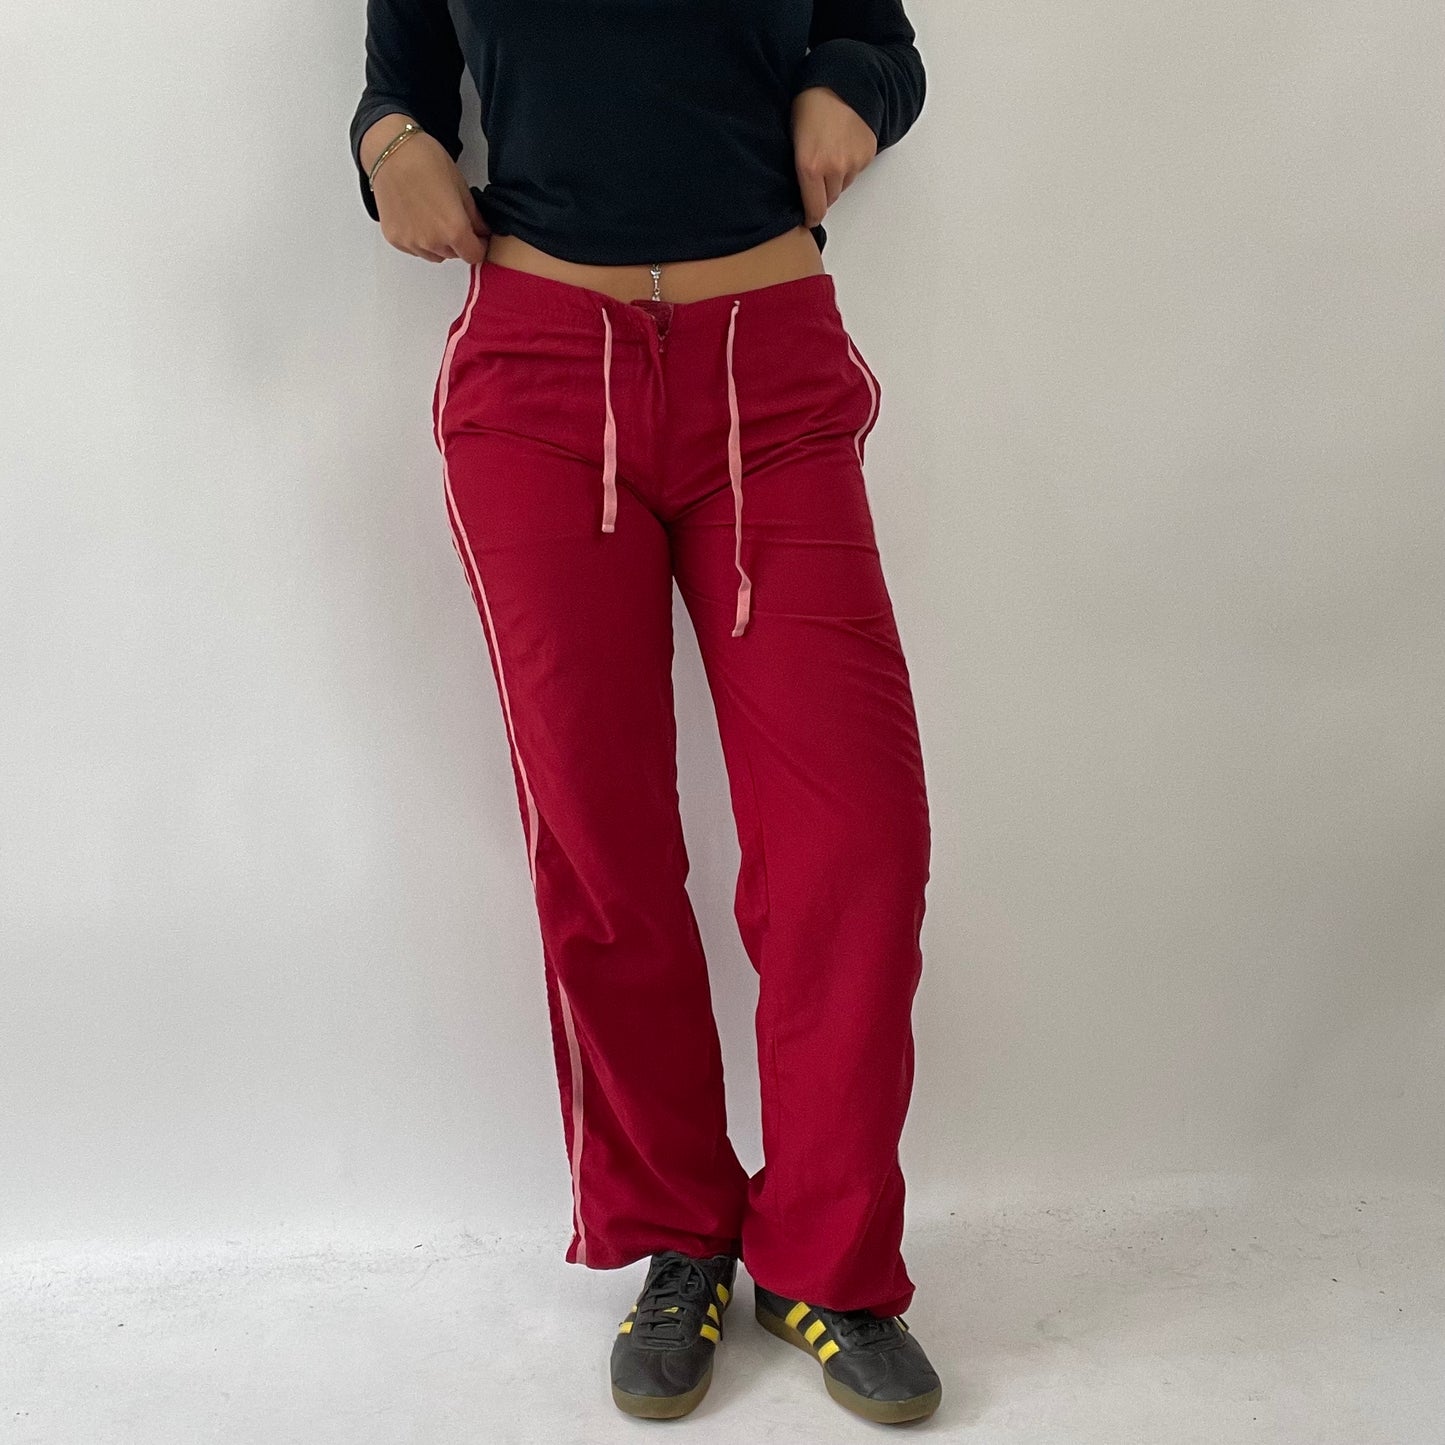 AMELIA GRAY DROP | medium red joggers with pink stripes